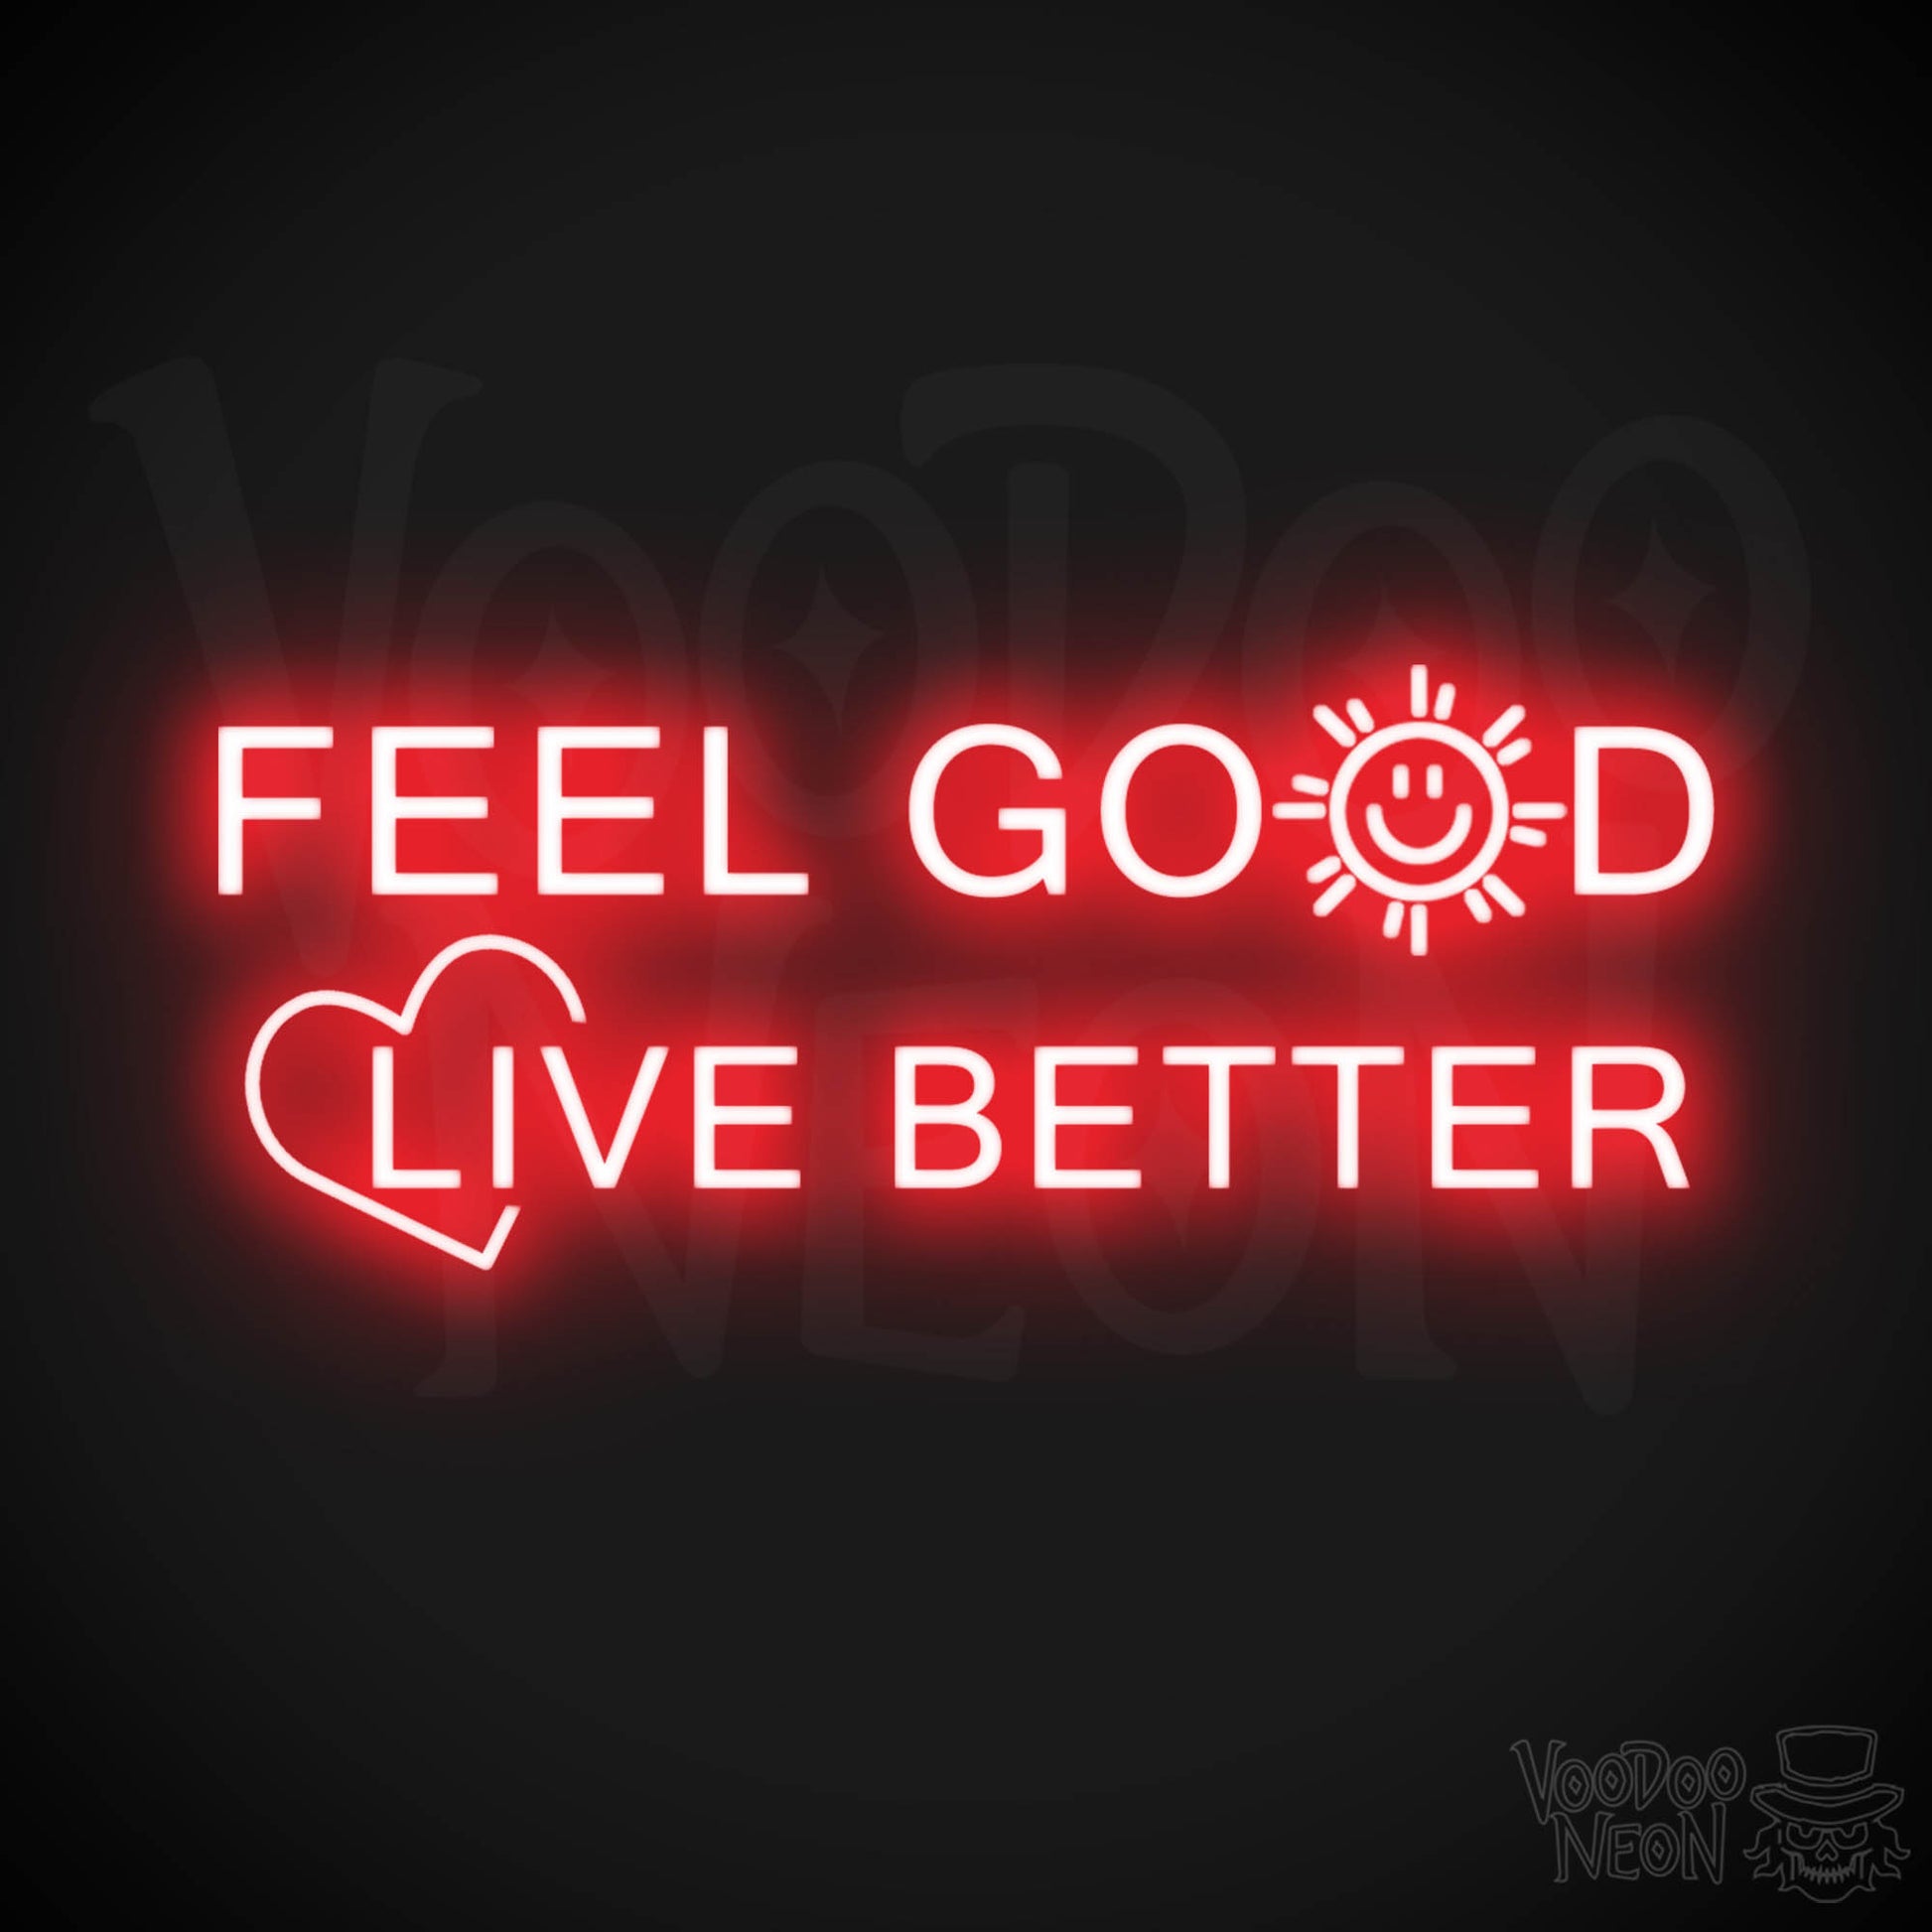 Feel Good Live Better Neon Sign - Feel Good Live Better Sign - Color Red